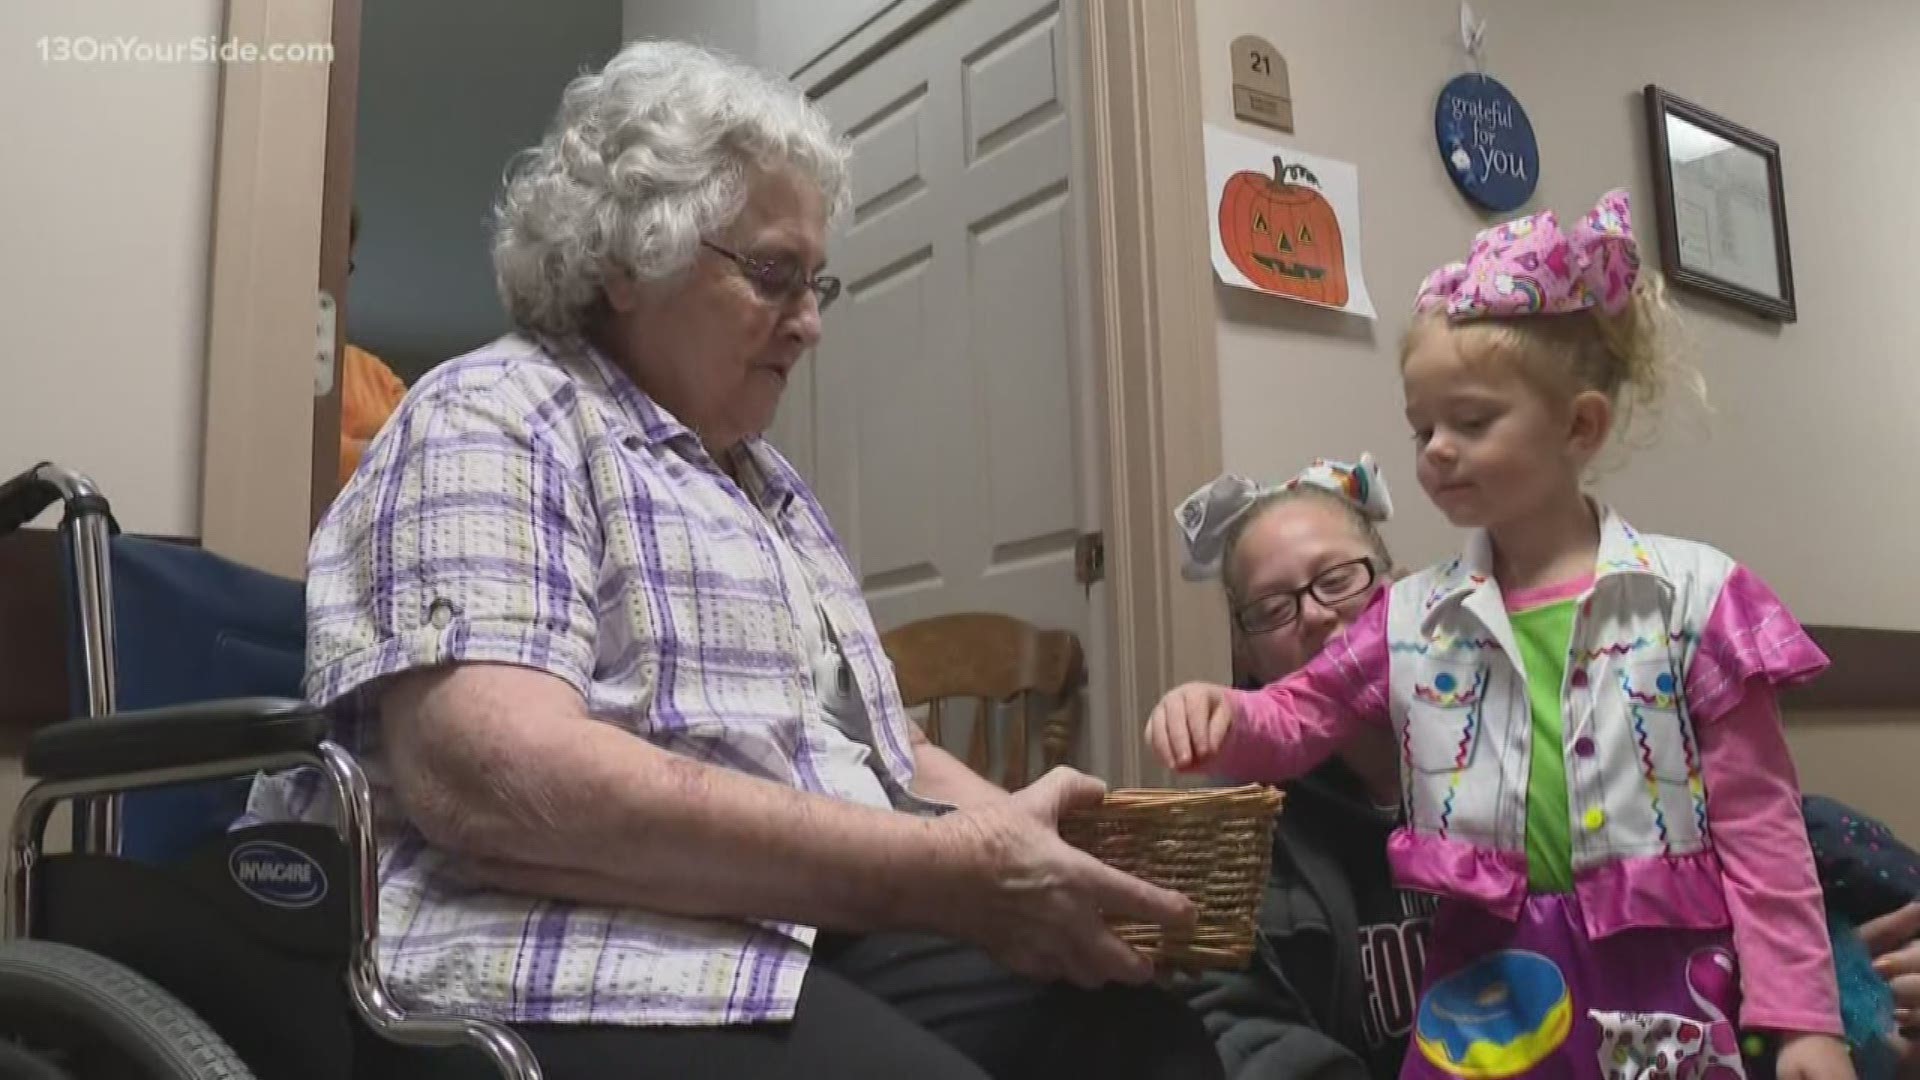 Some young trick-or-treaters stayed dry by getting their candy at the White lake Assisted Living Center.